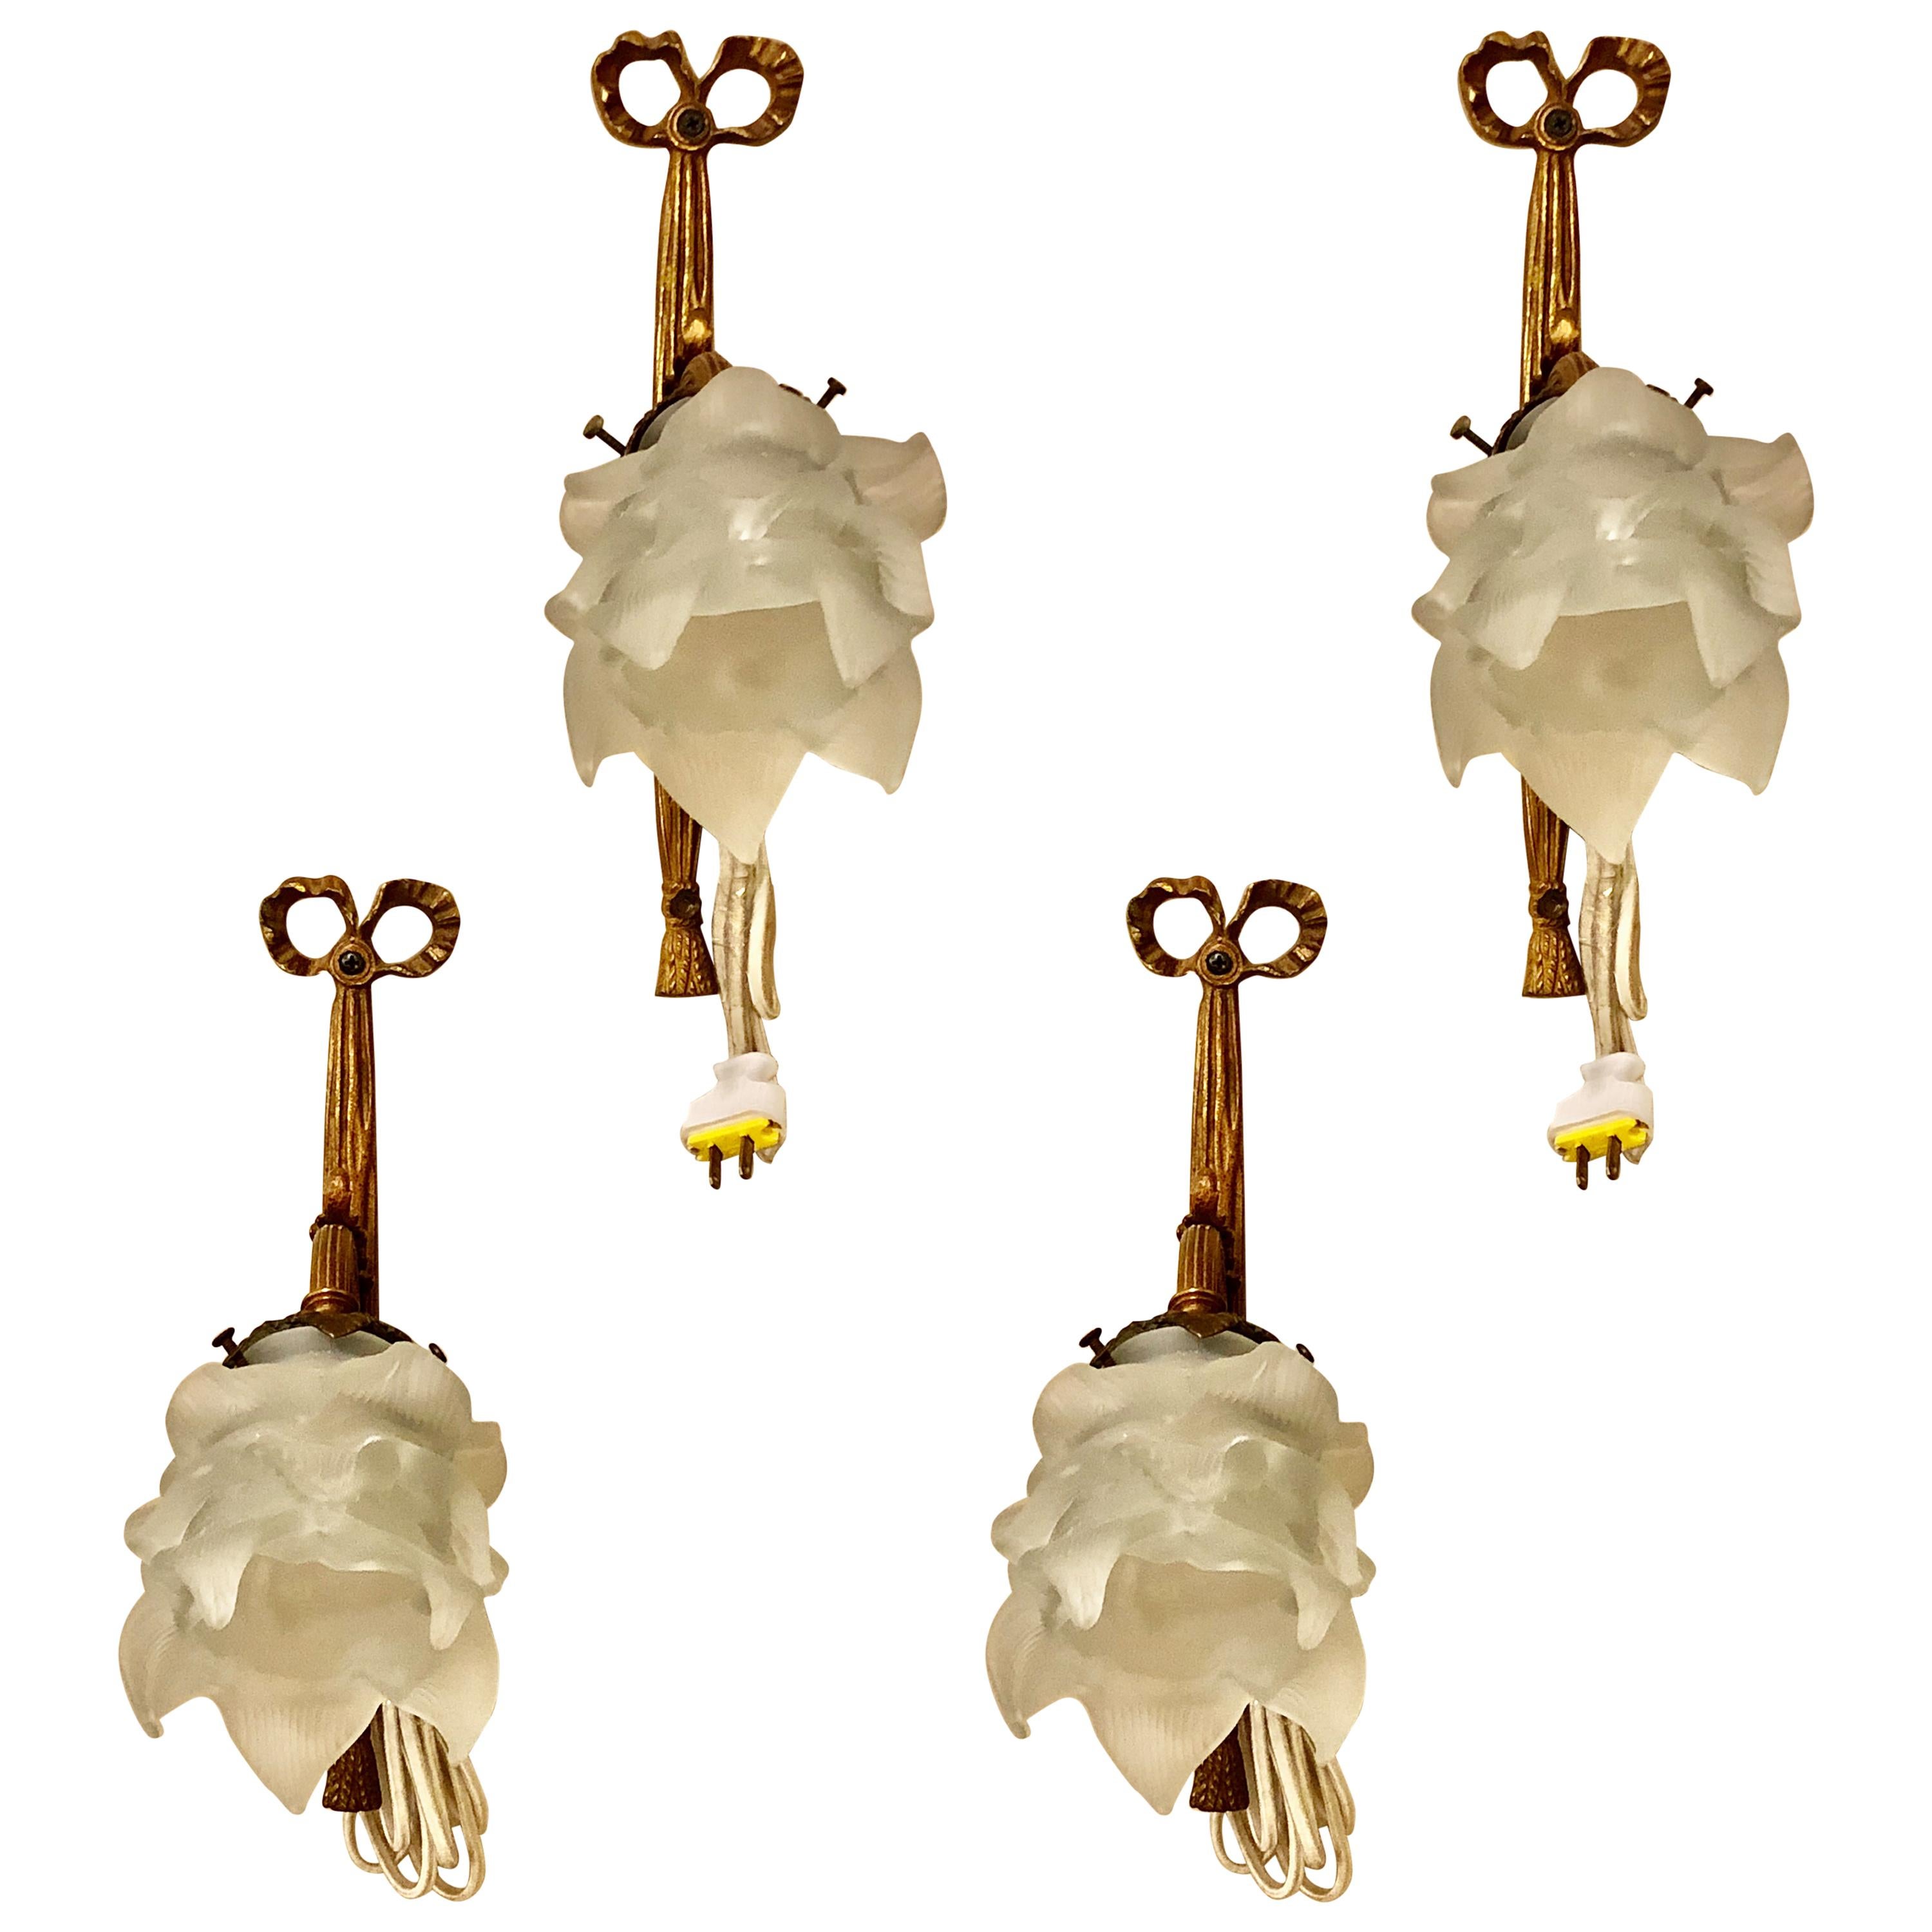 Group of Four Louis XVI Style Bronze Sconces with Lalique Style Shades